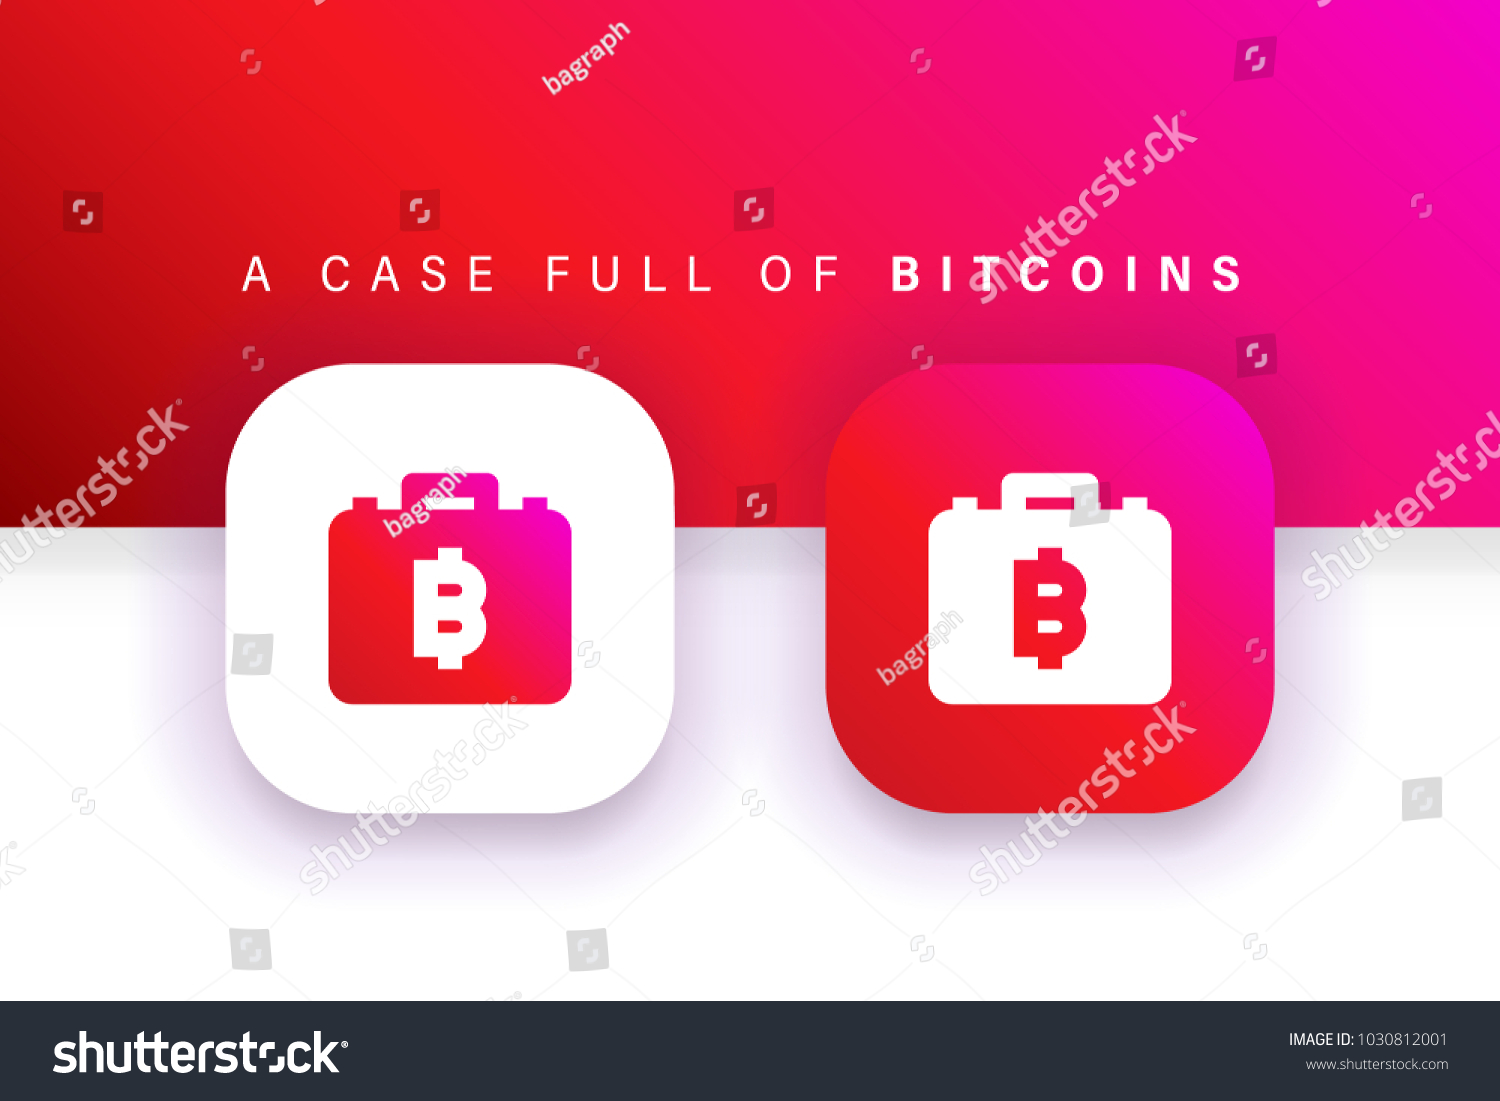 SVG of Bitcoin Case icon. Bitcoin Accounting icon. Square contained. Use for brand logo, application, ux/ui, web. Red design. Compatible with jpg, png, eps, ai, cdr, svg, pdf, ico, gif. svg